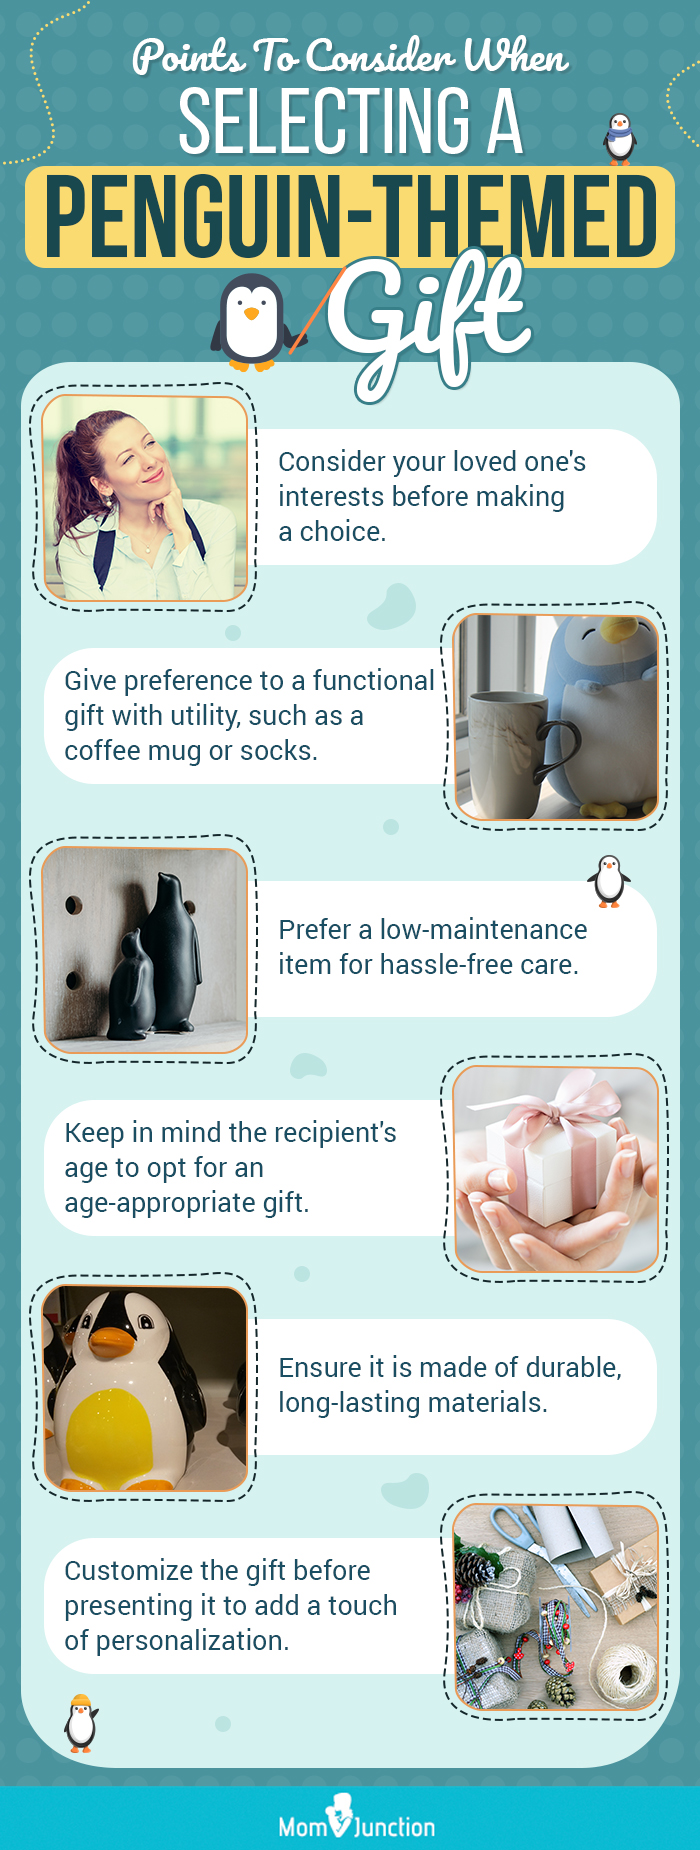 Points-To-Consider-When-Selecting-A-Penguin-Themed-Gift (infographic)